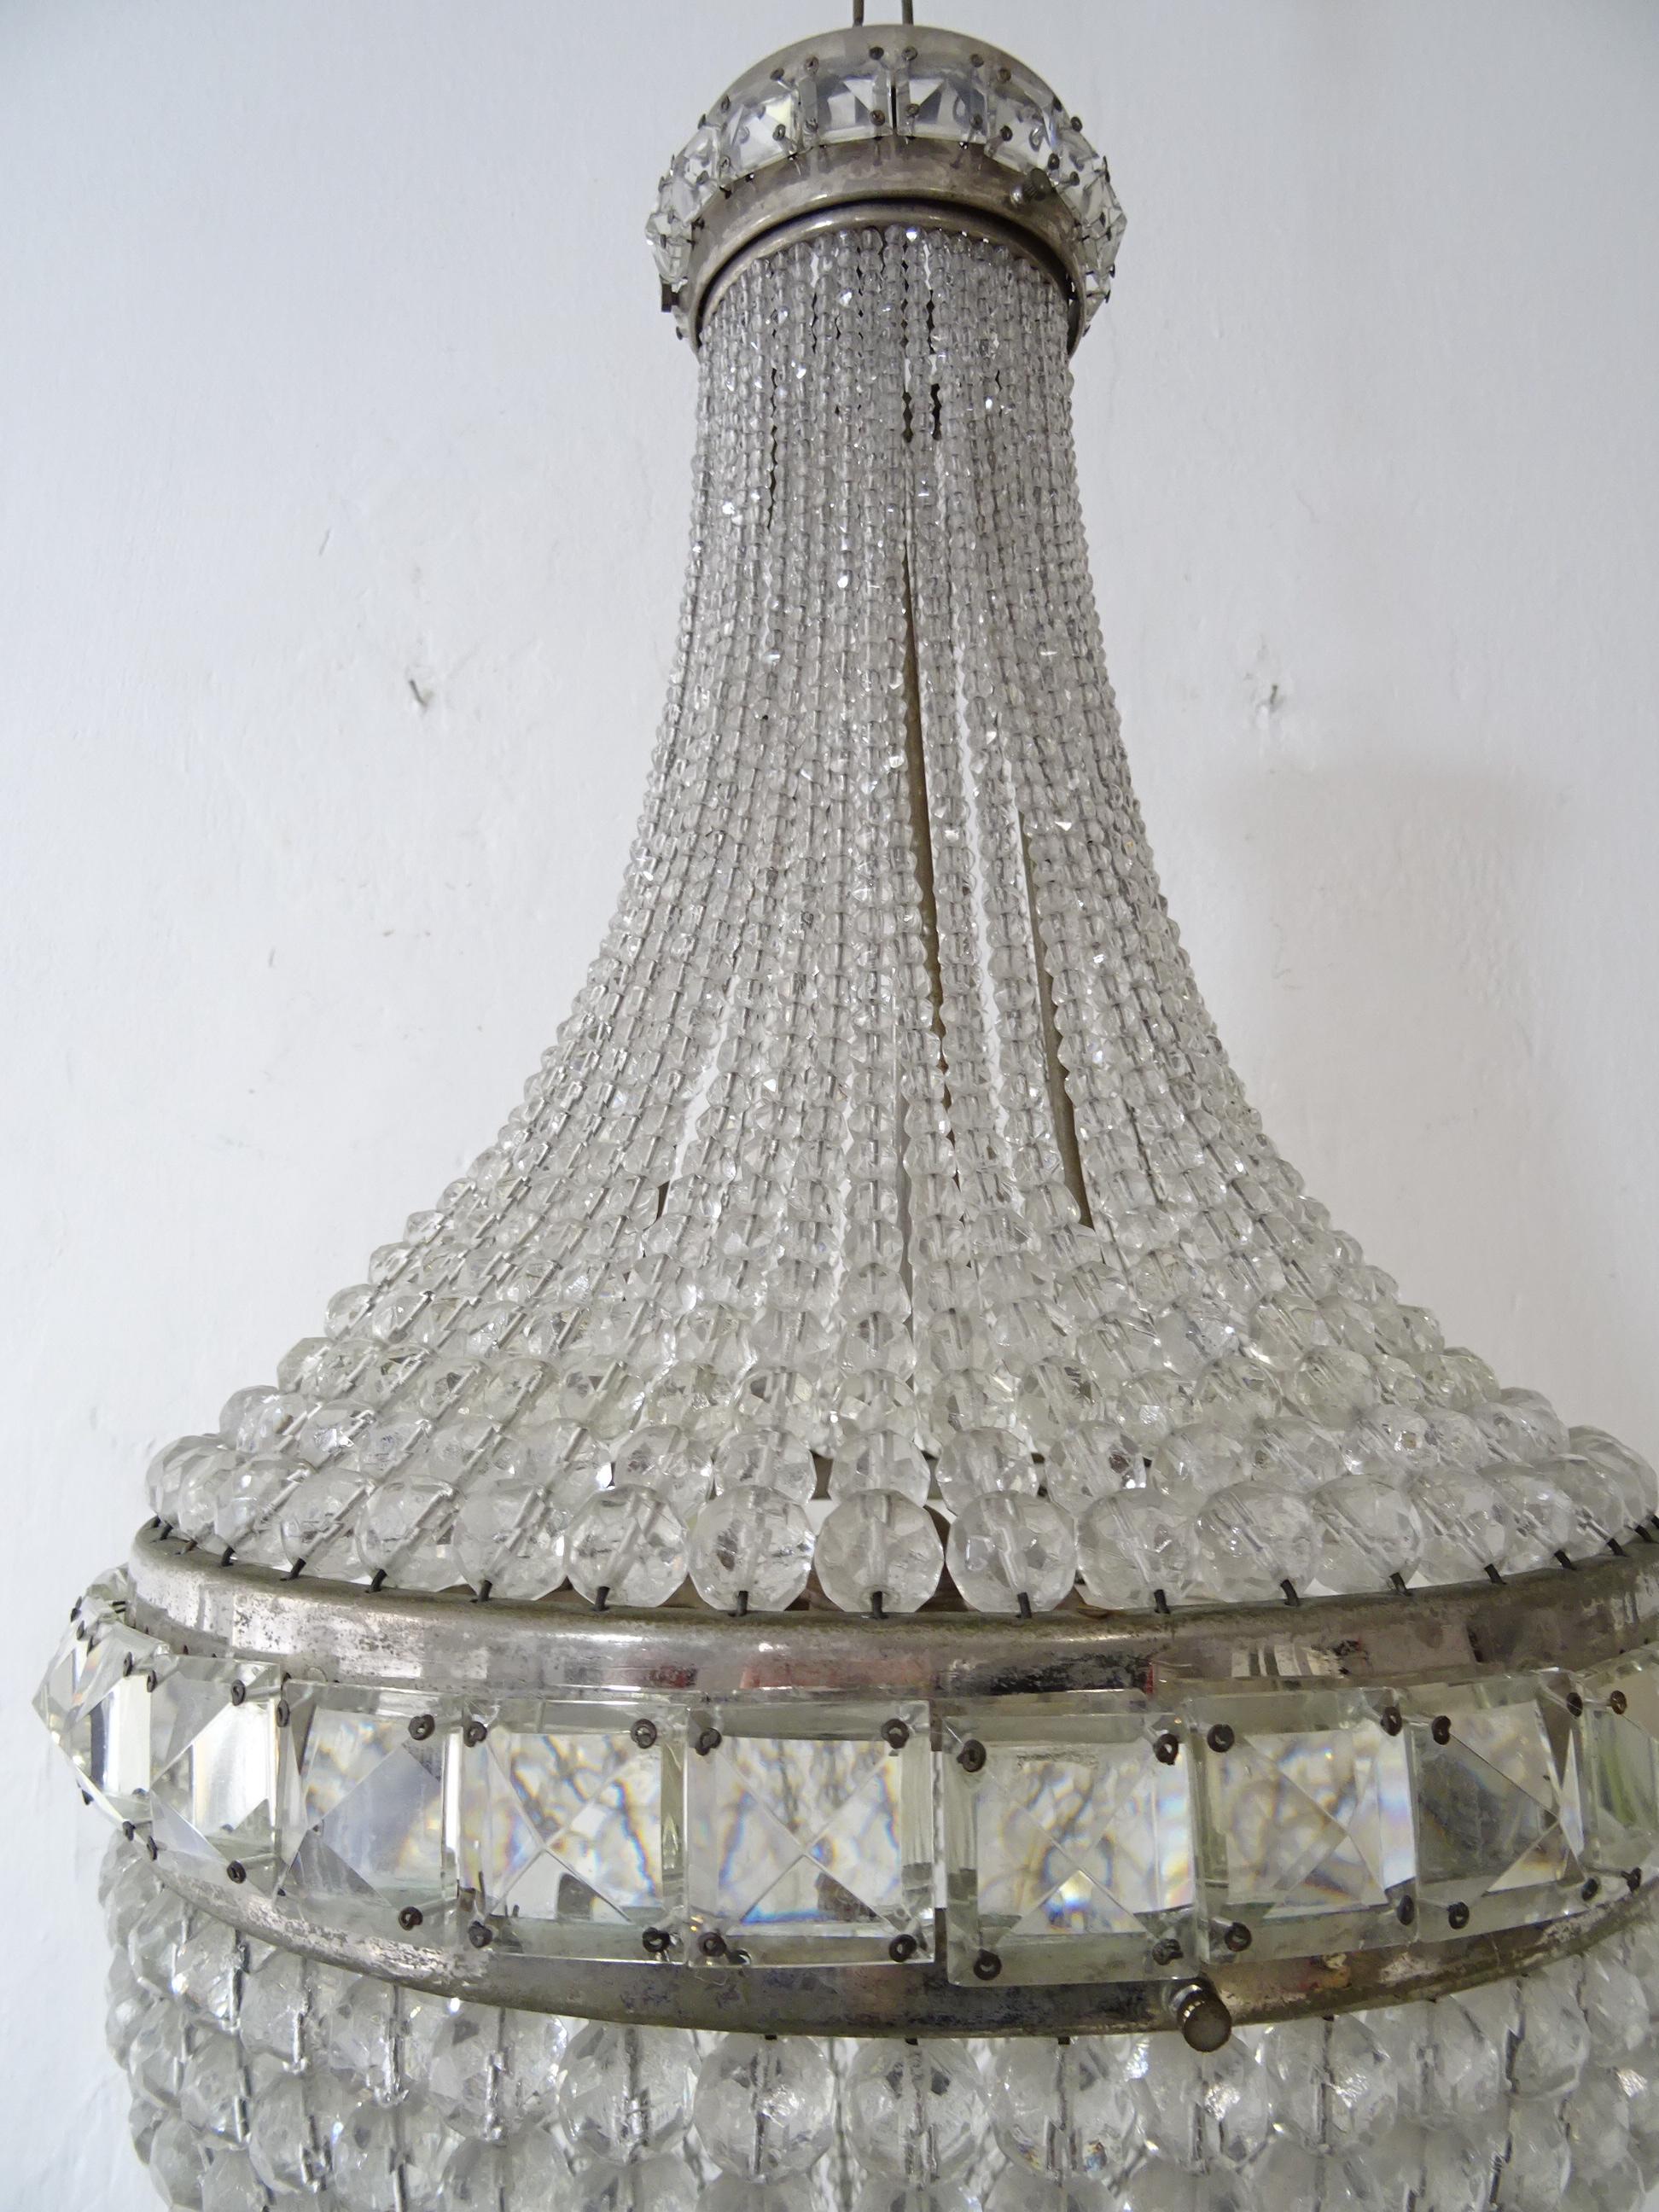 Big Crystal Beaded Empire Dome Chandelier circa 1900 For Sale 4